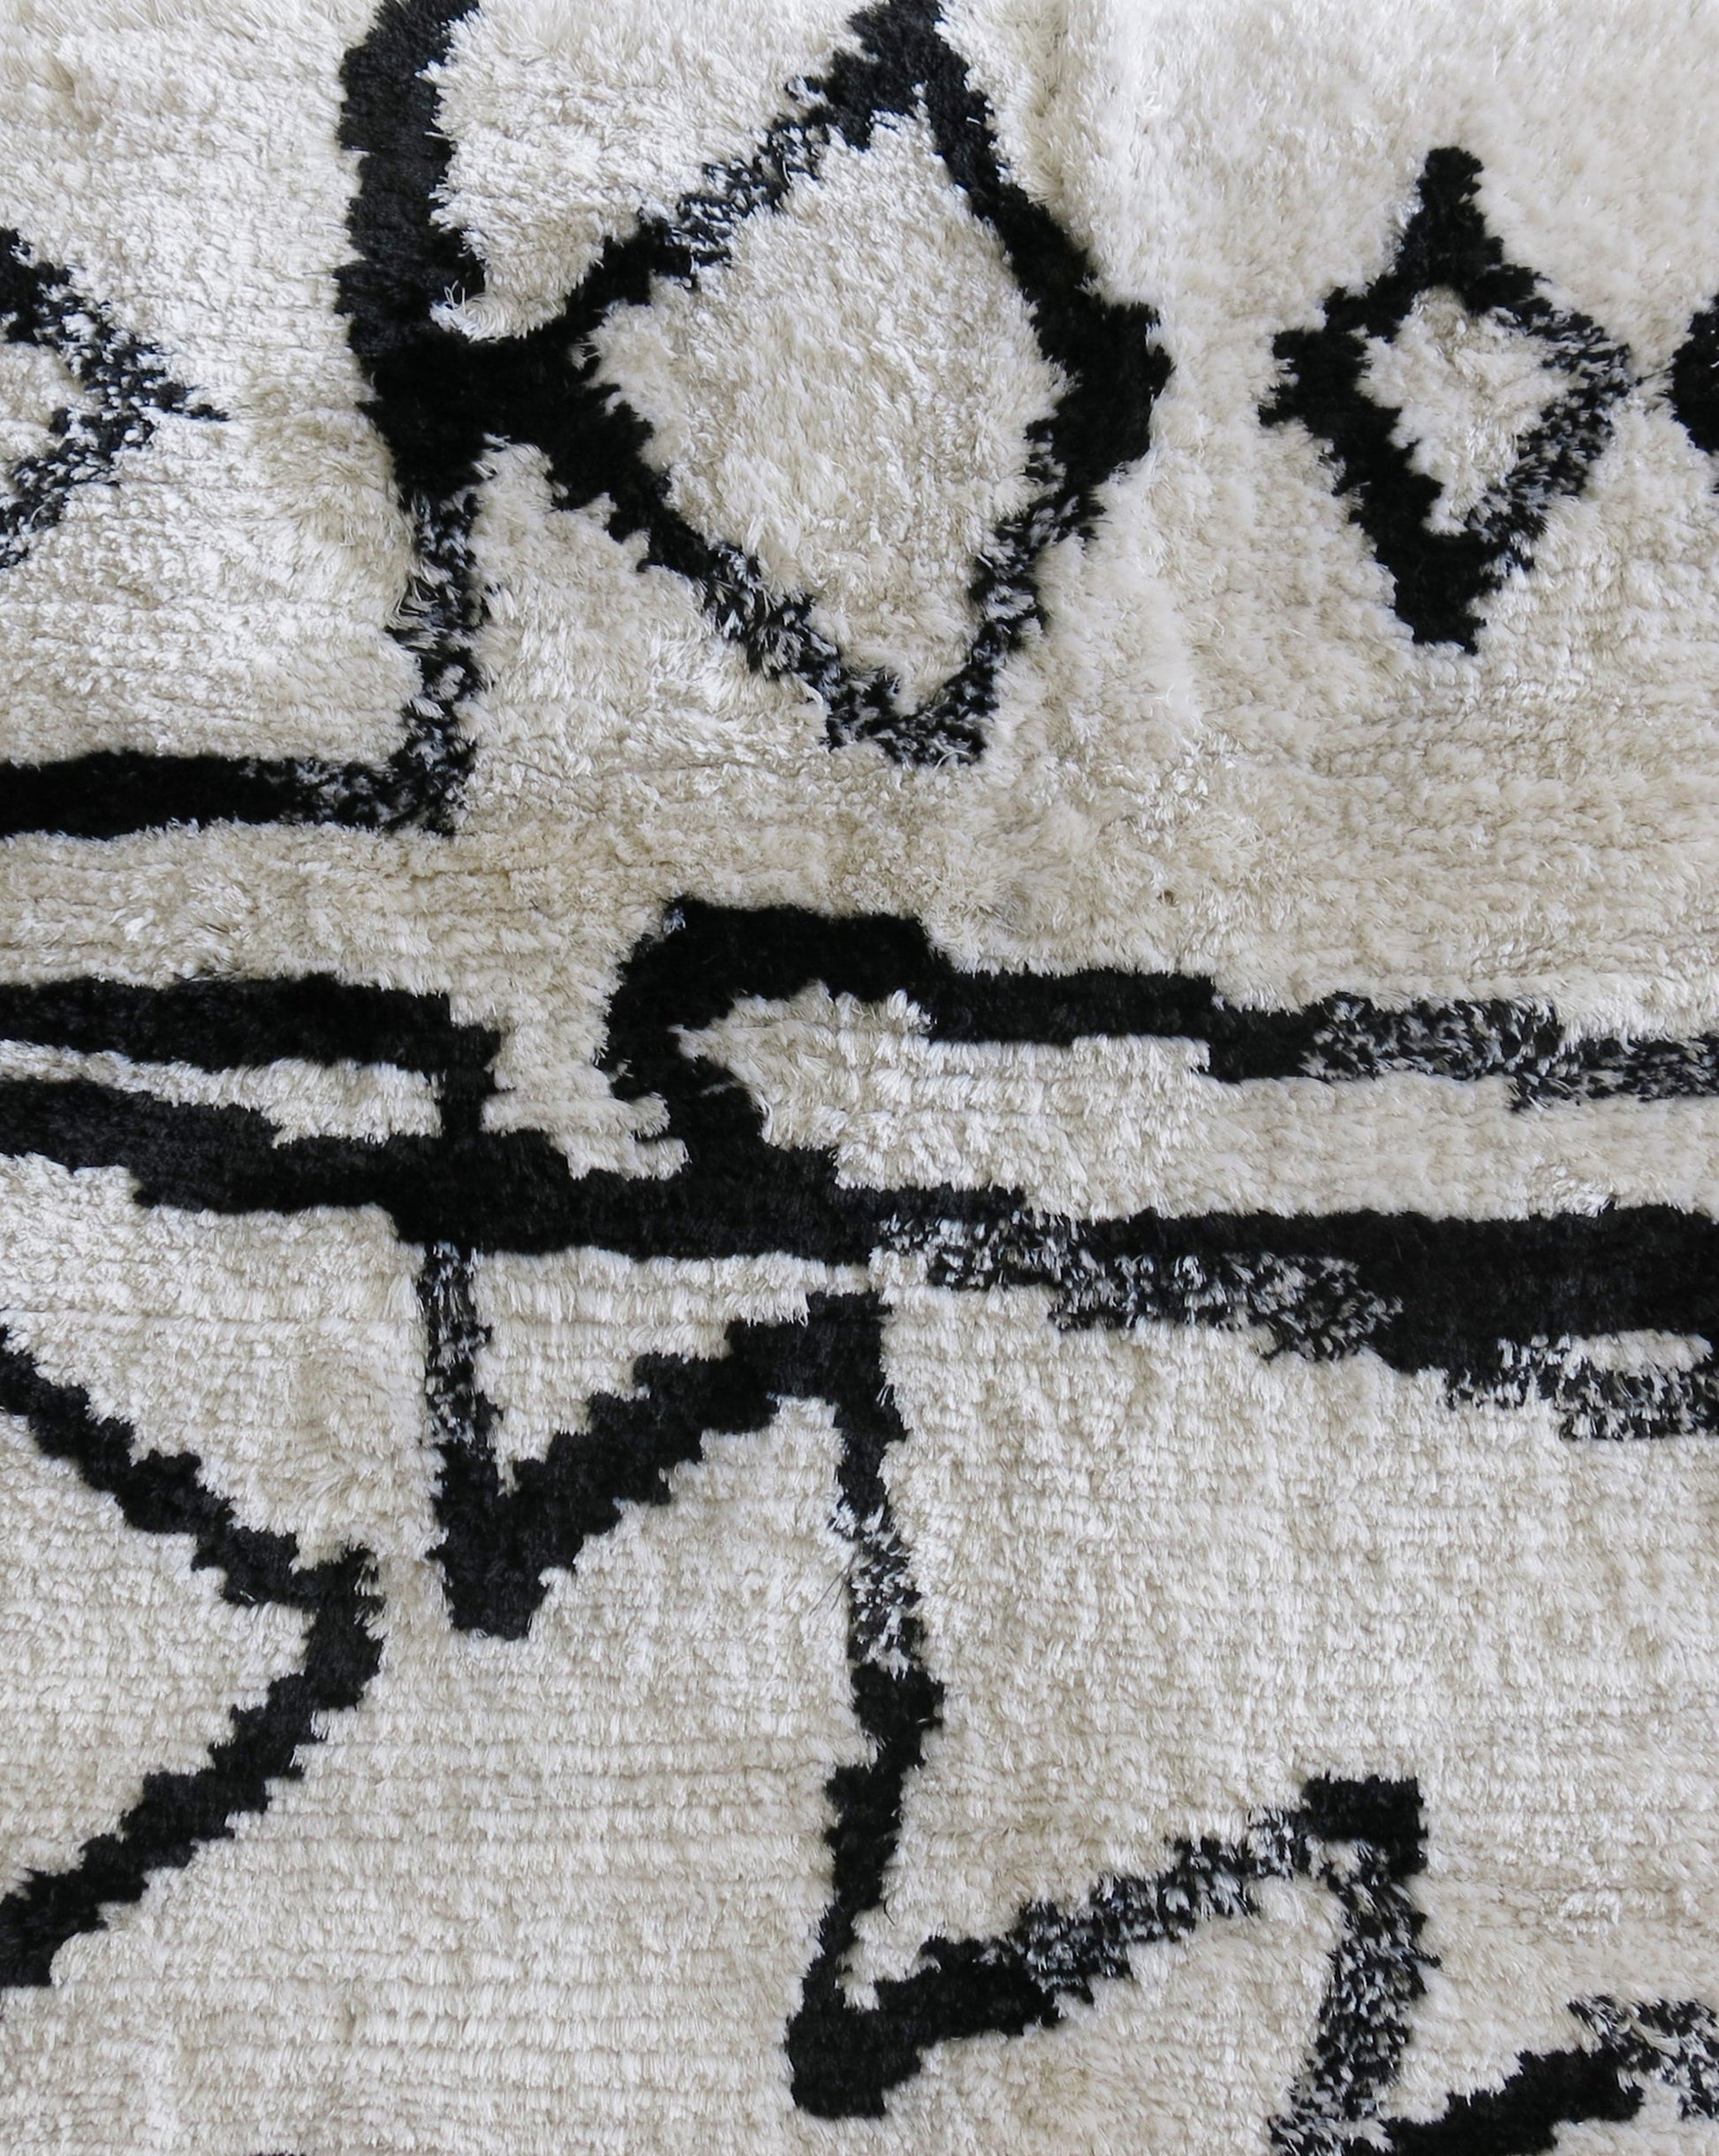 An Akimbo Hand Knotted Rug||Black And White with graphic geometric designs on it.